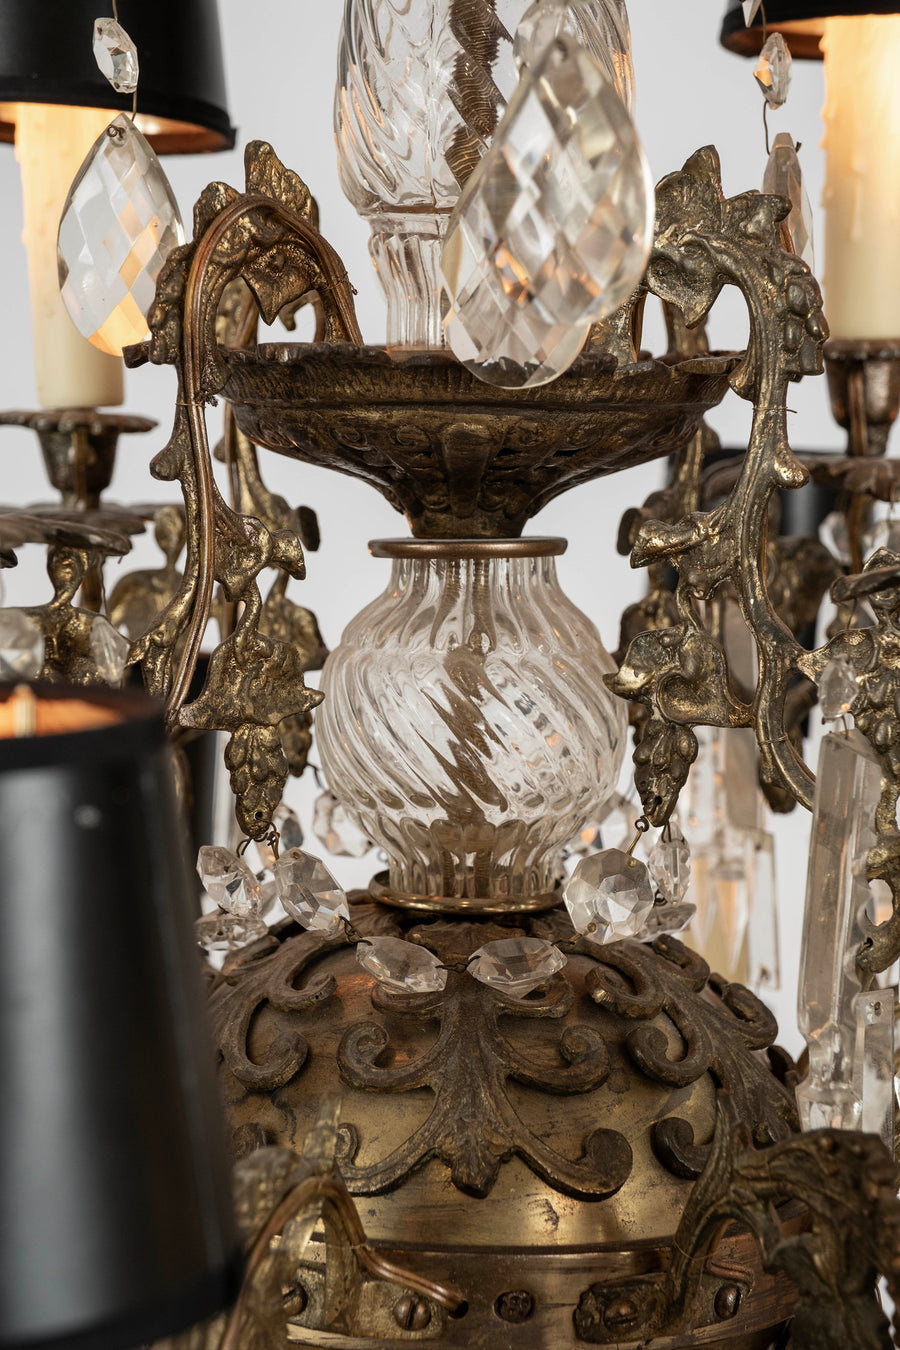 Louis XV Style Crystal Chandelier